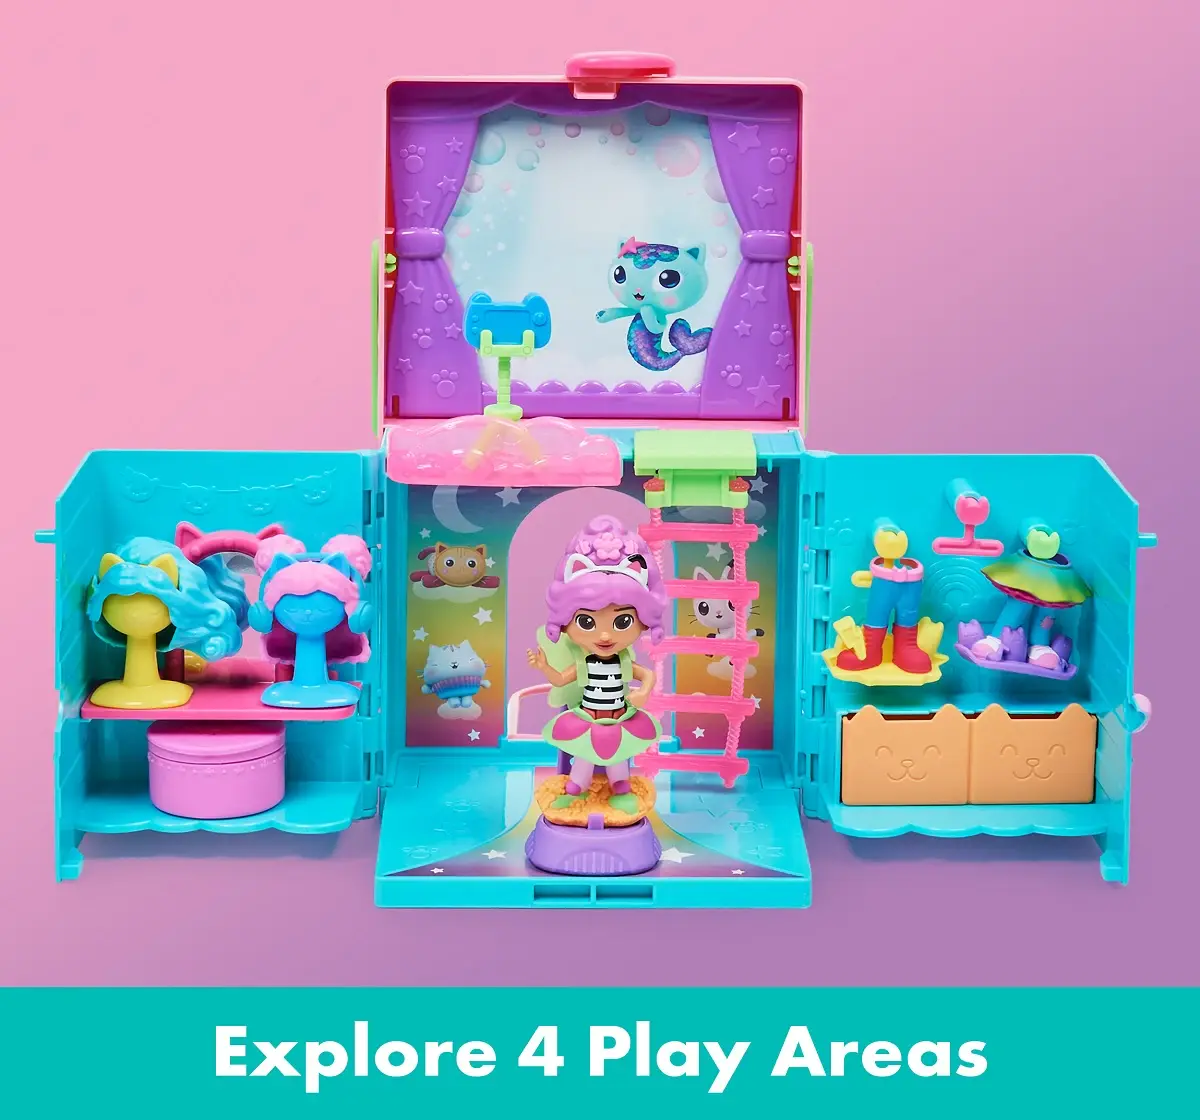  Gabby's Dollhouse Celebration Party Bus Playset with Gabby & DJ  Catnip Toy Figures and Dollhouse Accessories, Kids Toys for Ages 3 and Up :  Toys & Games